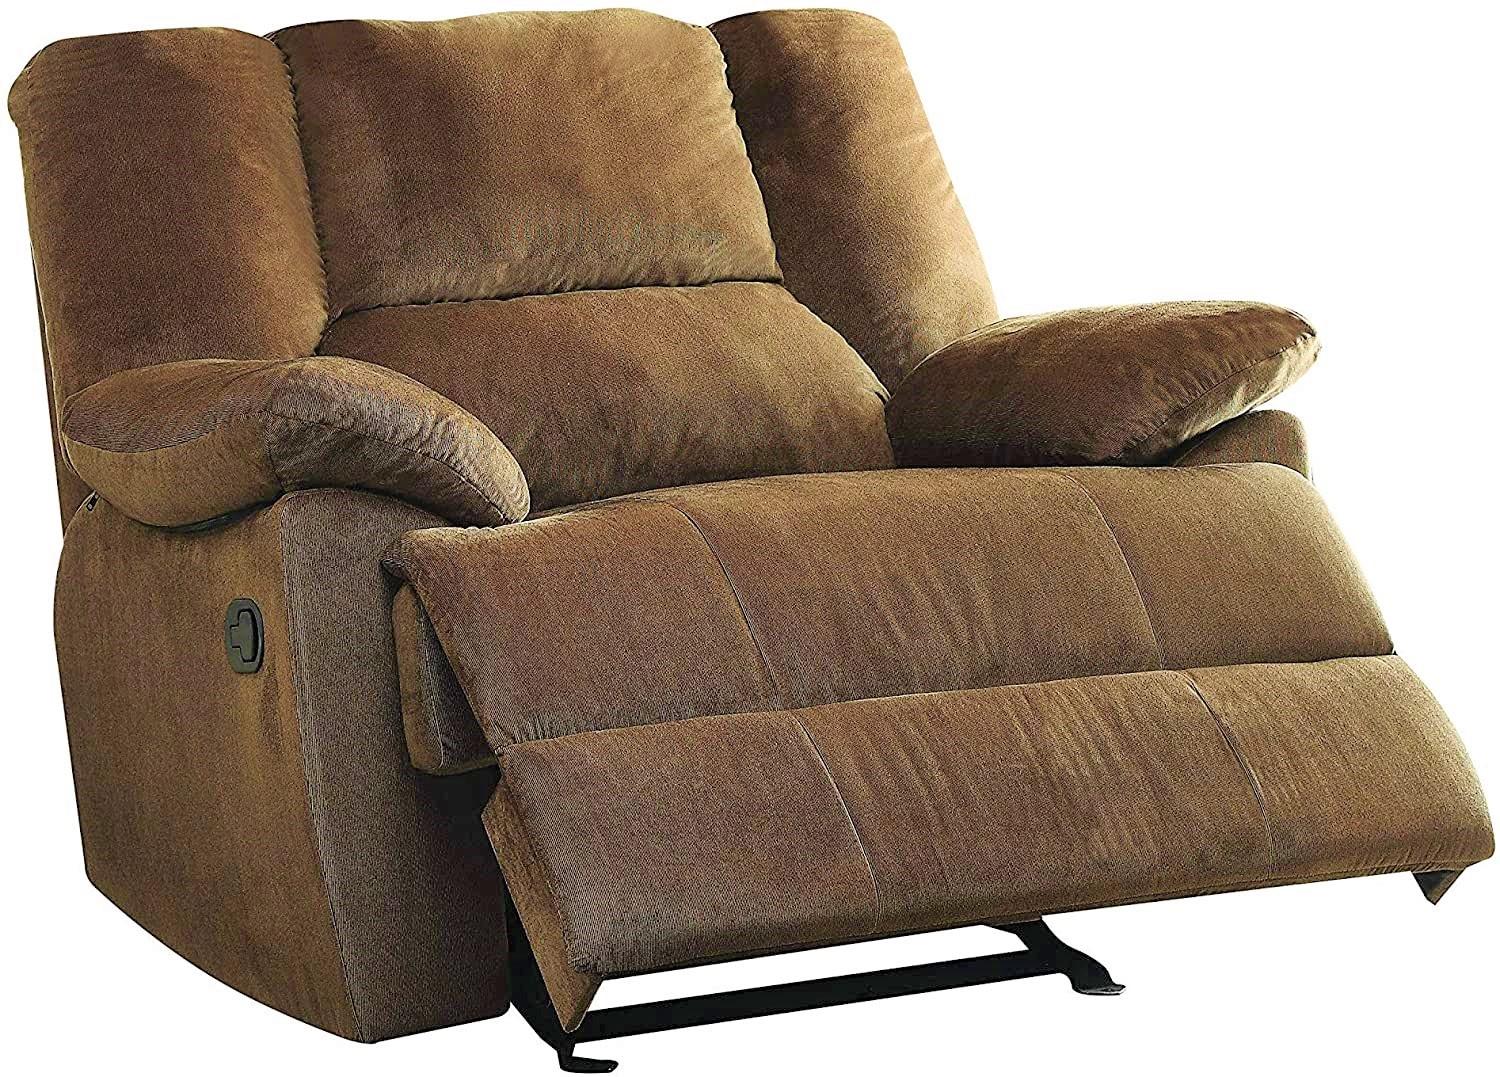 Contemporary Glider Reclining Chair Oliver 59415 in Chocolate 